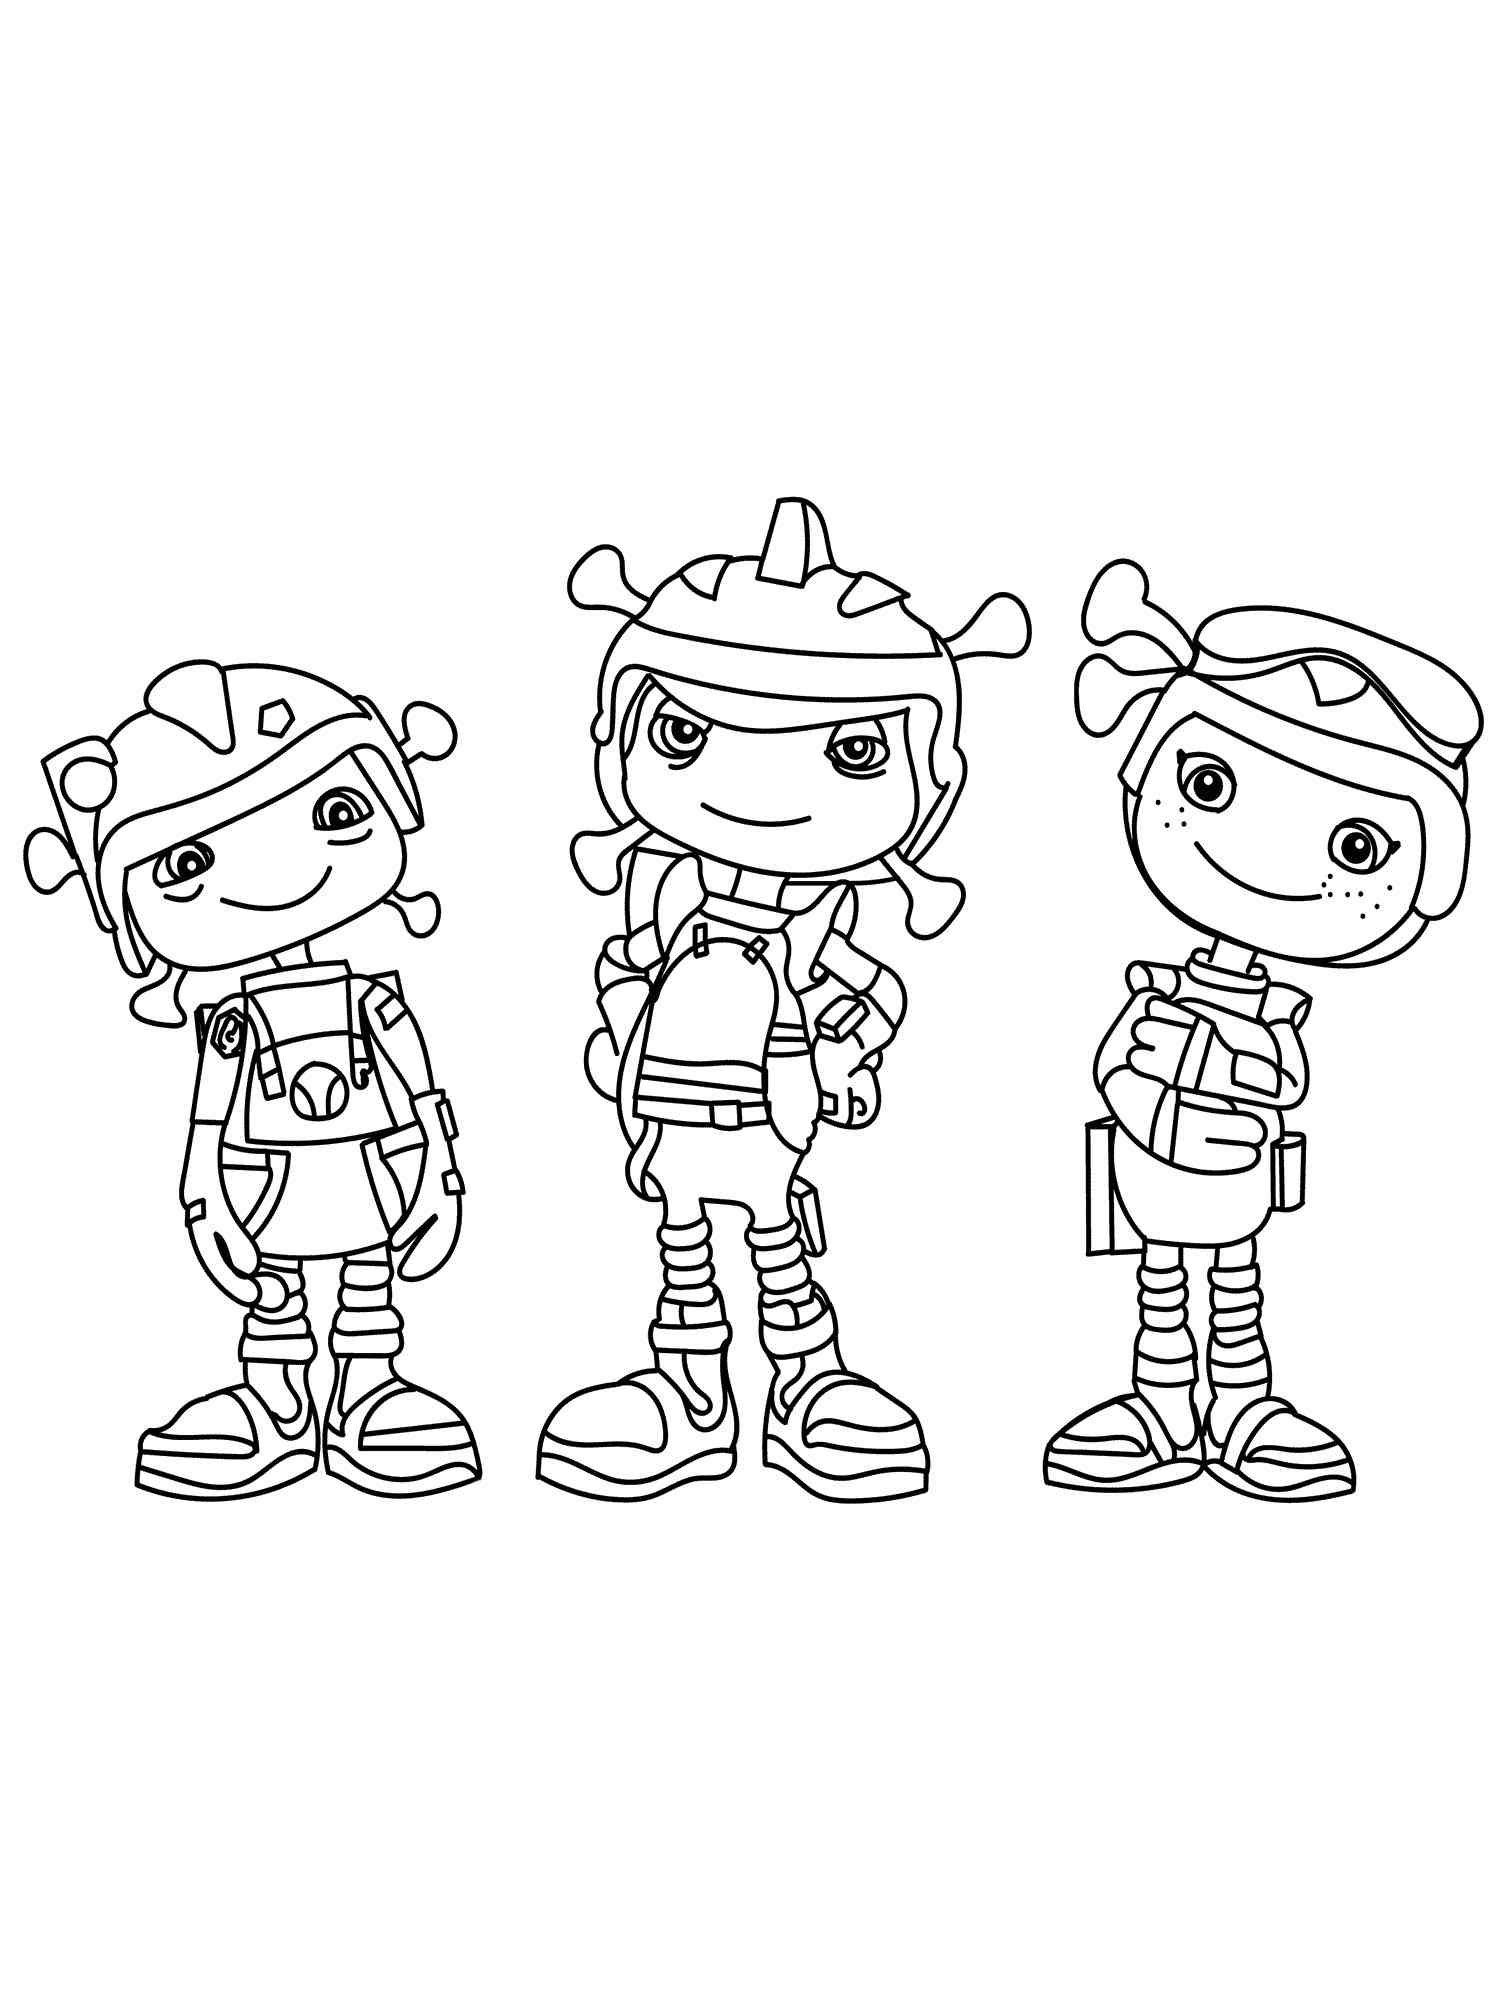 Floogals 6 coloring page